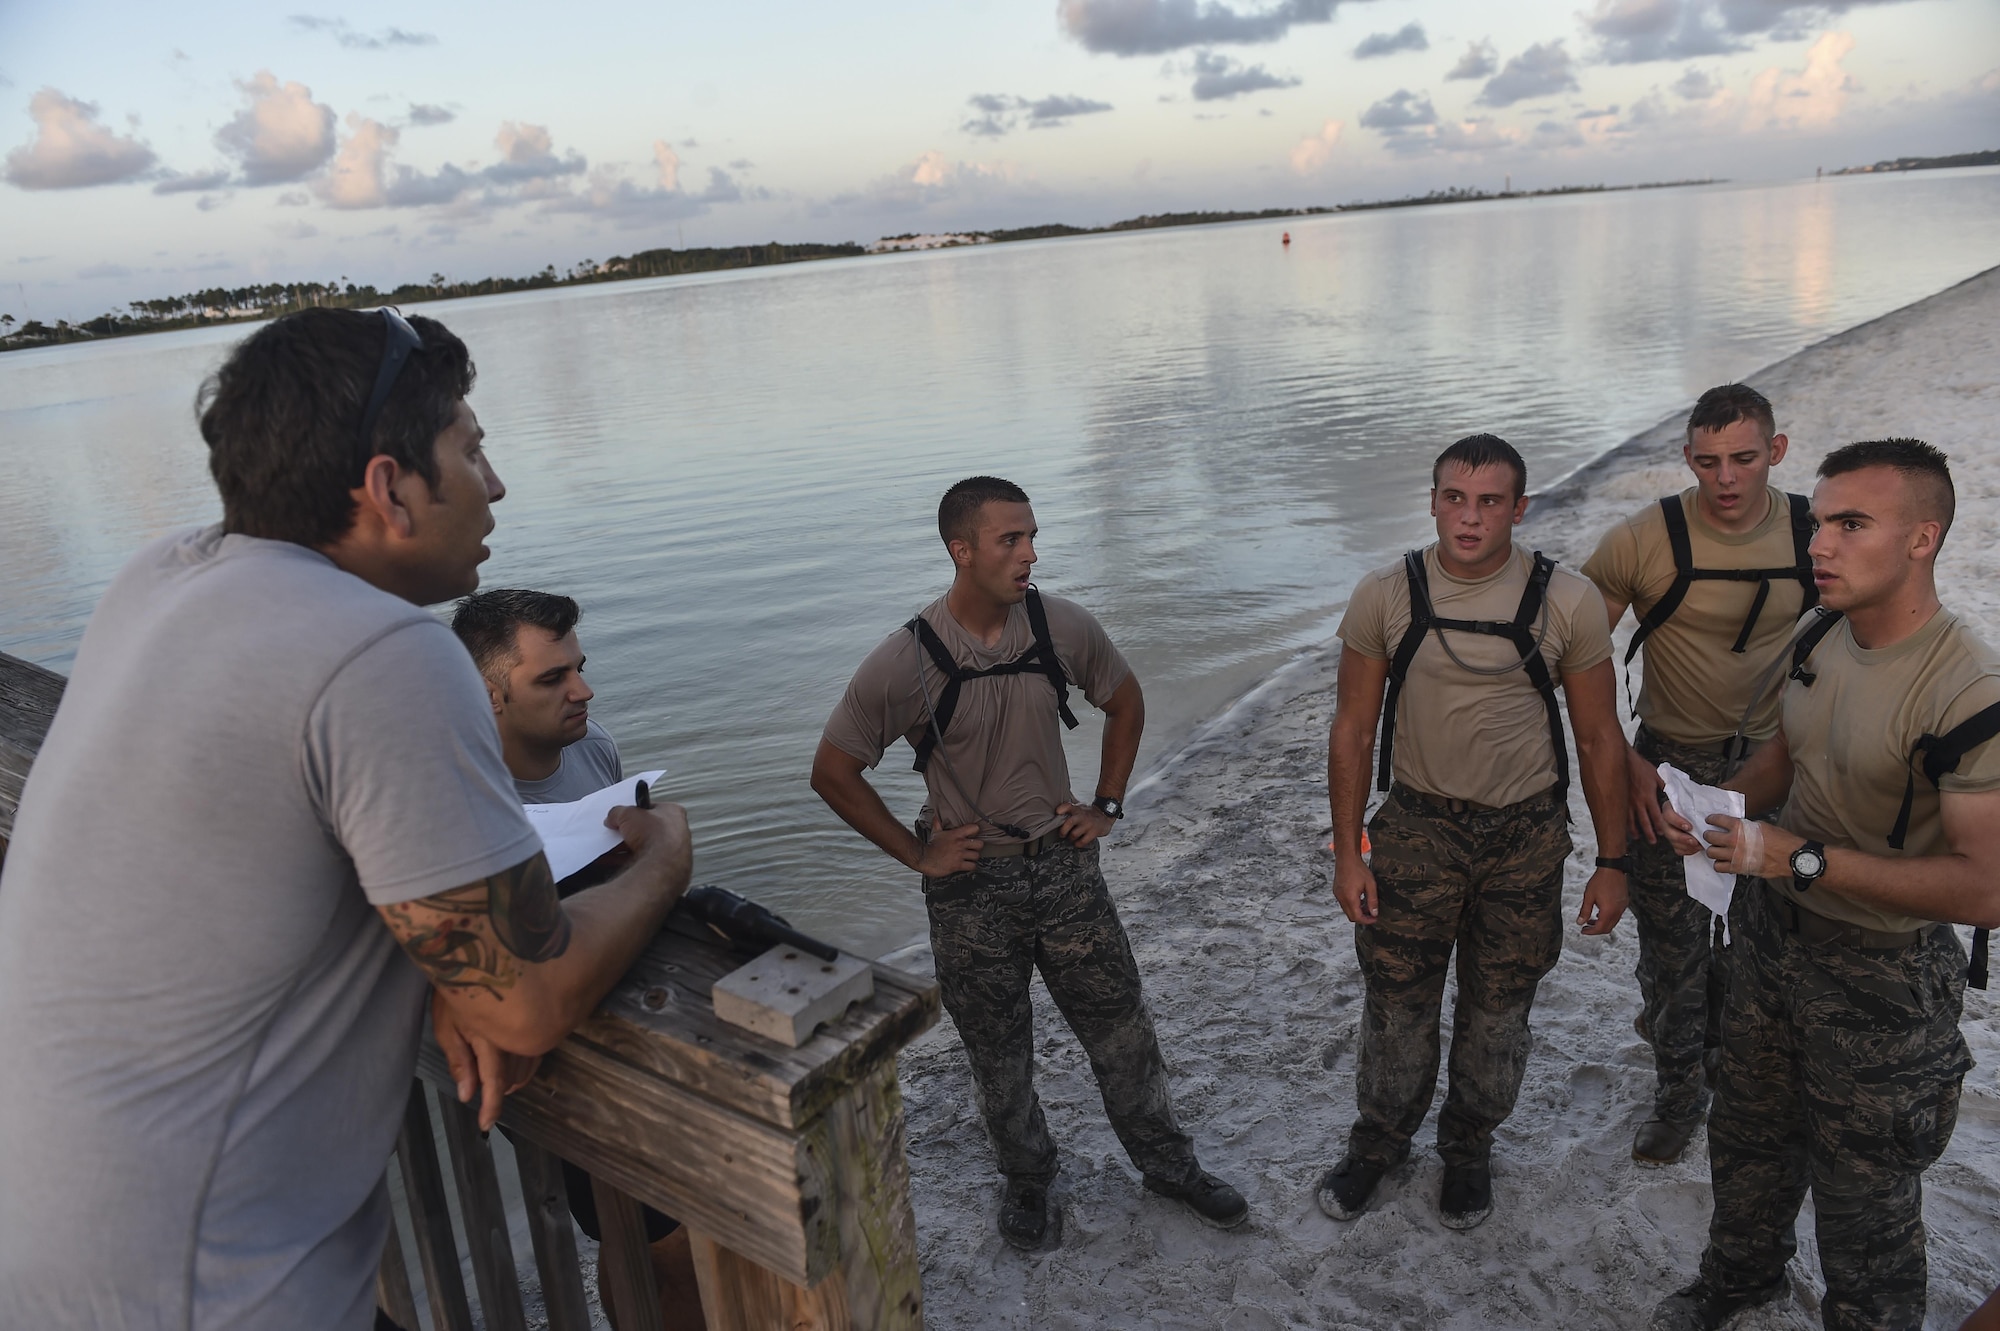 Master Sgt. Ismael Villegas, section chief assigned to the Special Tactics Training Squadron recruitment, assessment and selection team, quizzes ROTC cadets during a Special Tactics orientation course at Hurlburt Field, Fla., July 29, 2016. Run twice a summer by the 24th Special Operations Wing, 48 cadets spent a week learning what it takes to become a Special Tactics officer. (U.S. Air Force photo by Senior Airman Ryan Conroy)